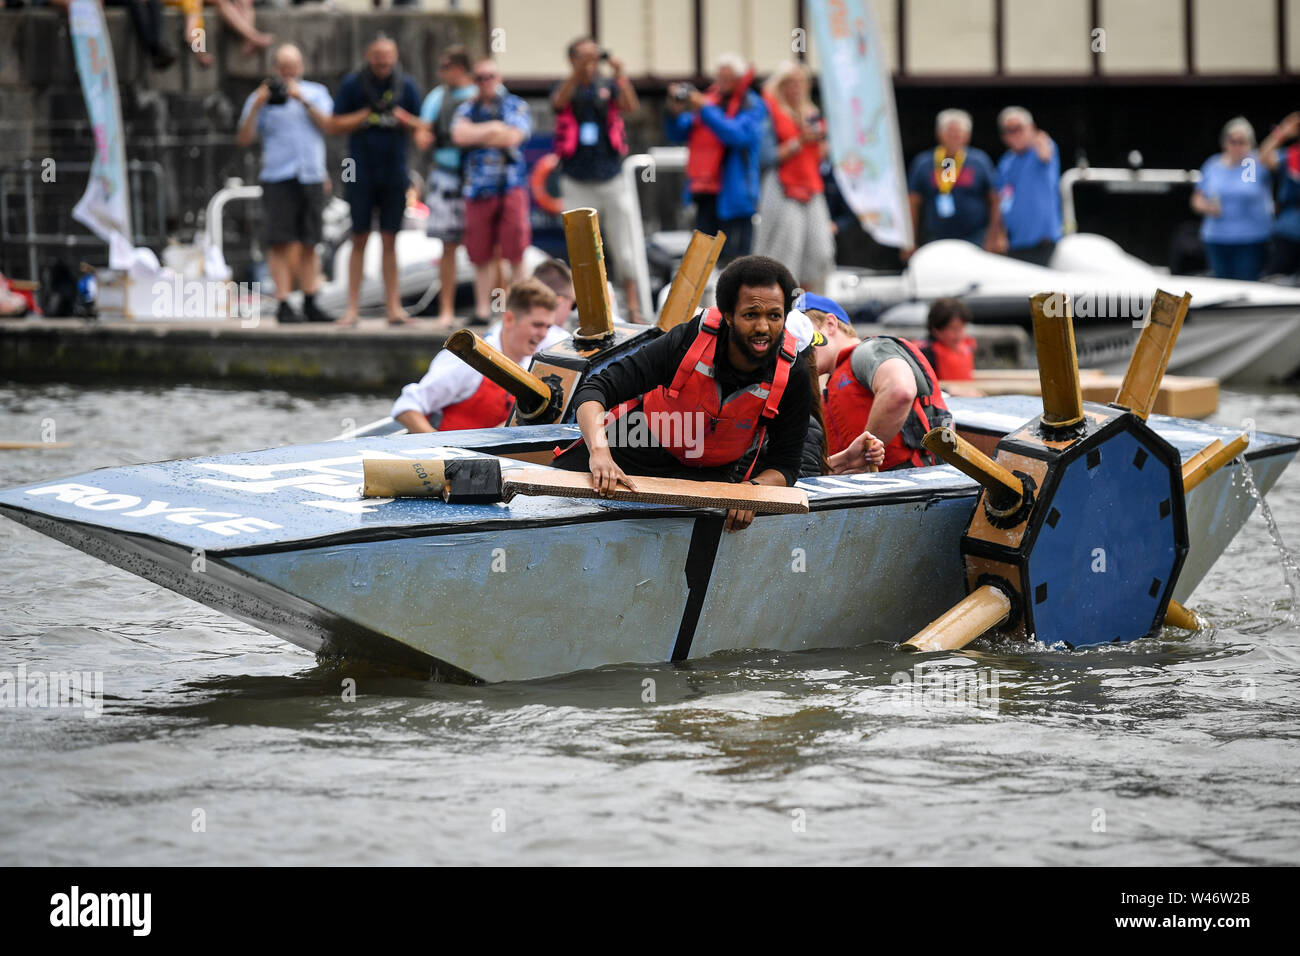 An ingenious paddle boat takes part in the cardboard boat race as they use cardboard tubes on a spindle during the Bristol Harbour festival, where hundreds of vessels have gathered in the city centre floating harbour. Stock Photo